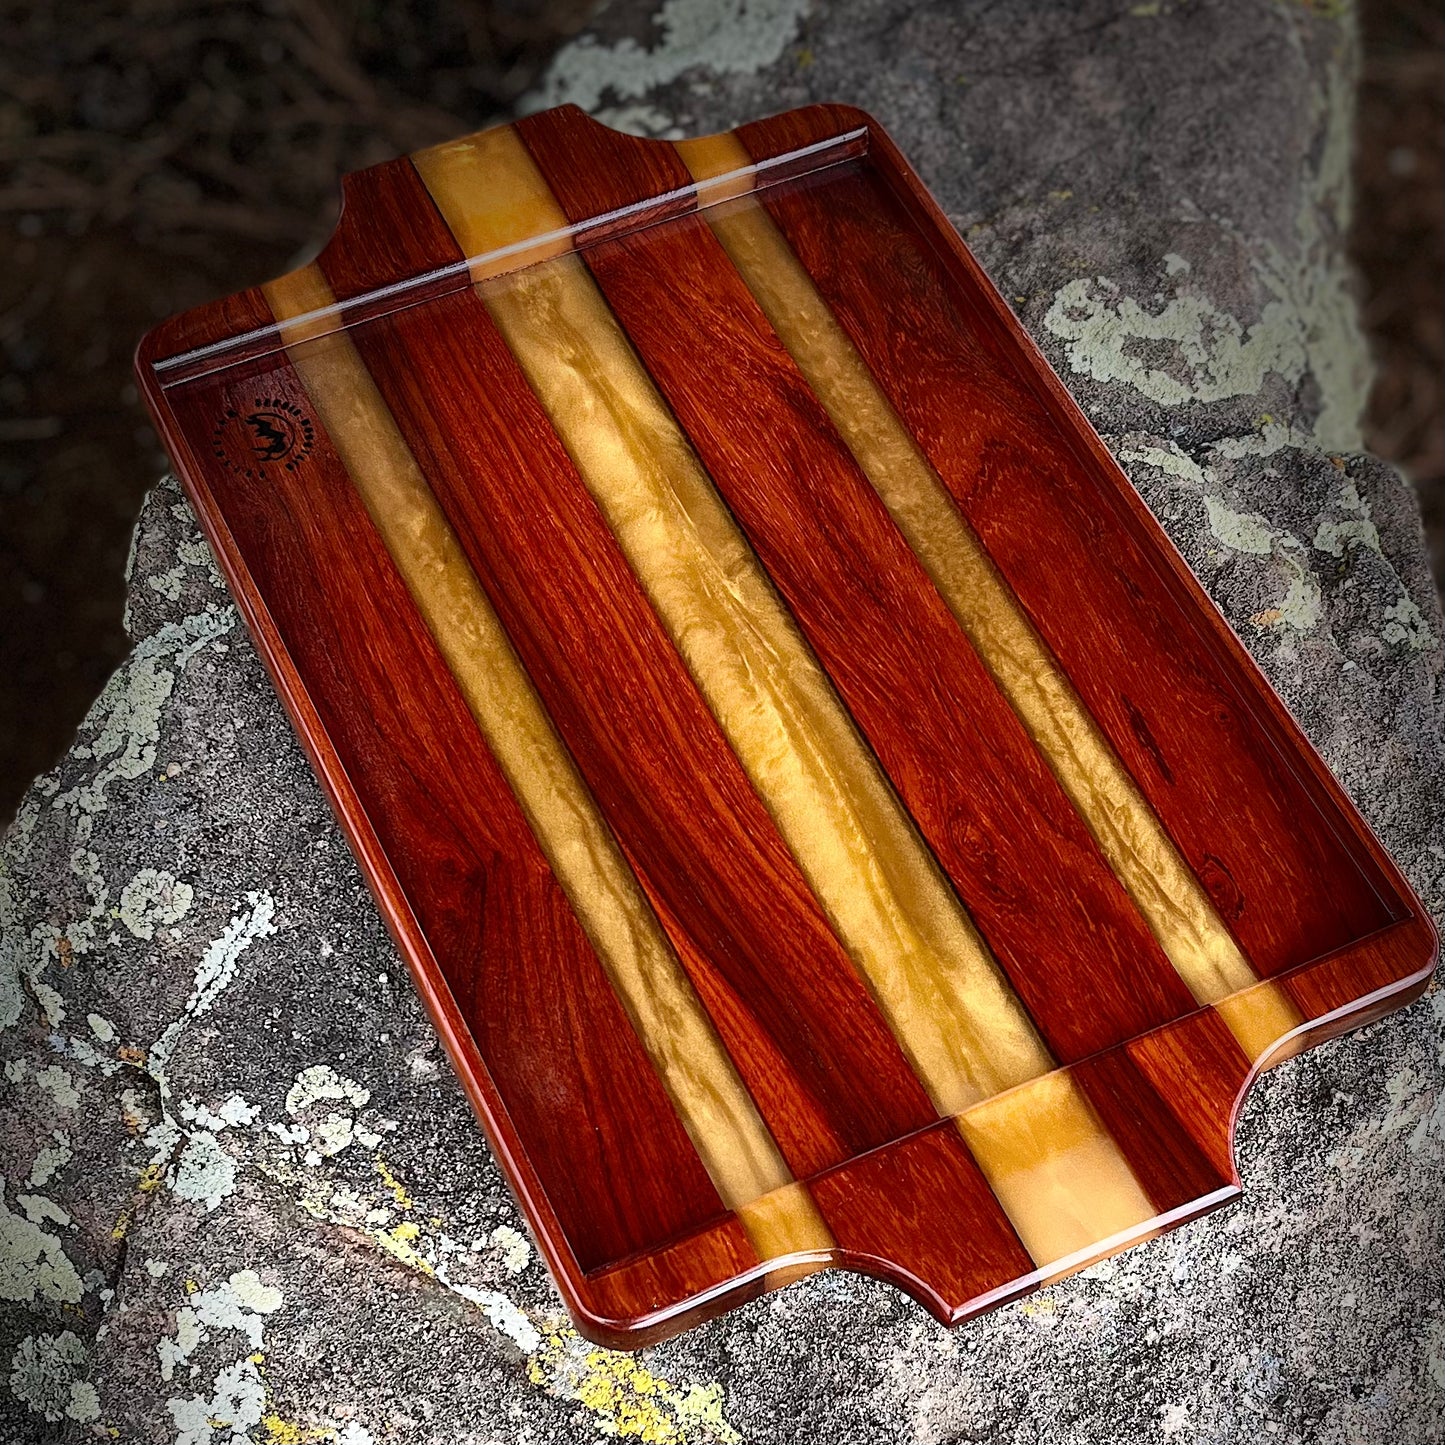 Resin River Serving Tray